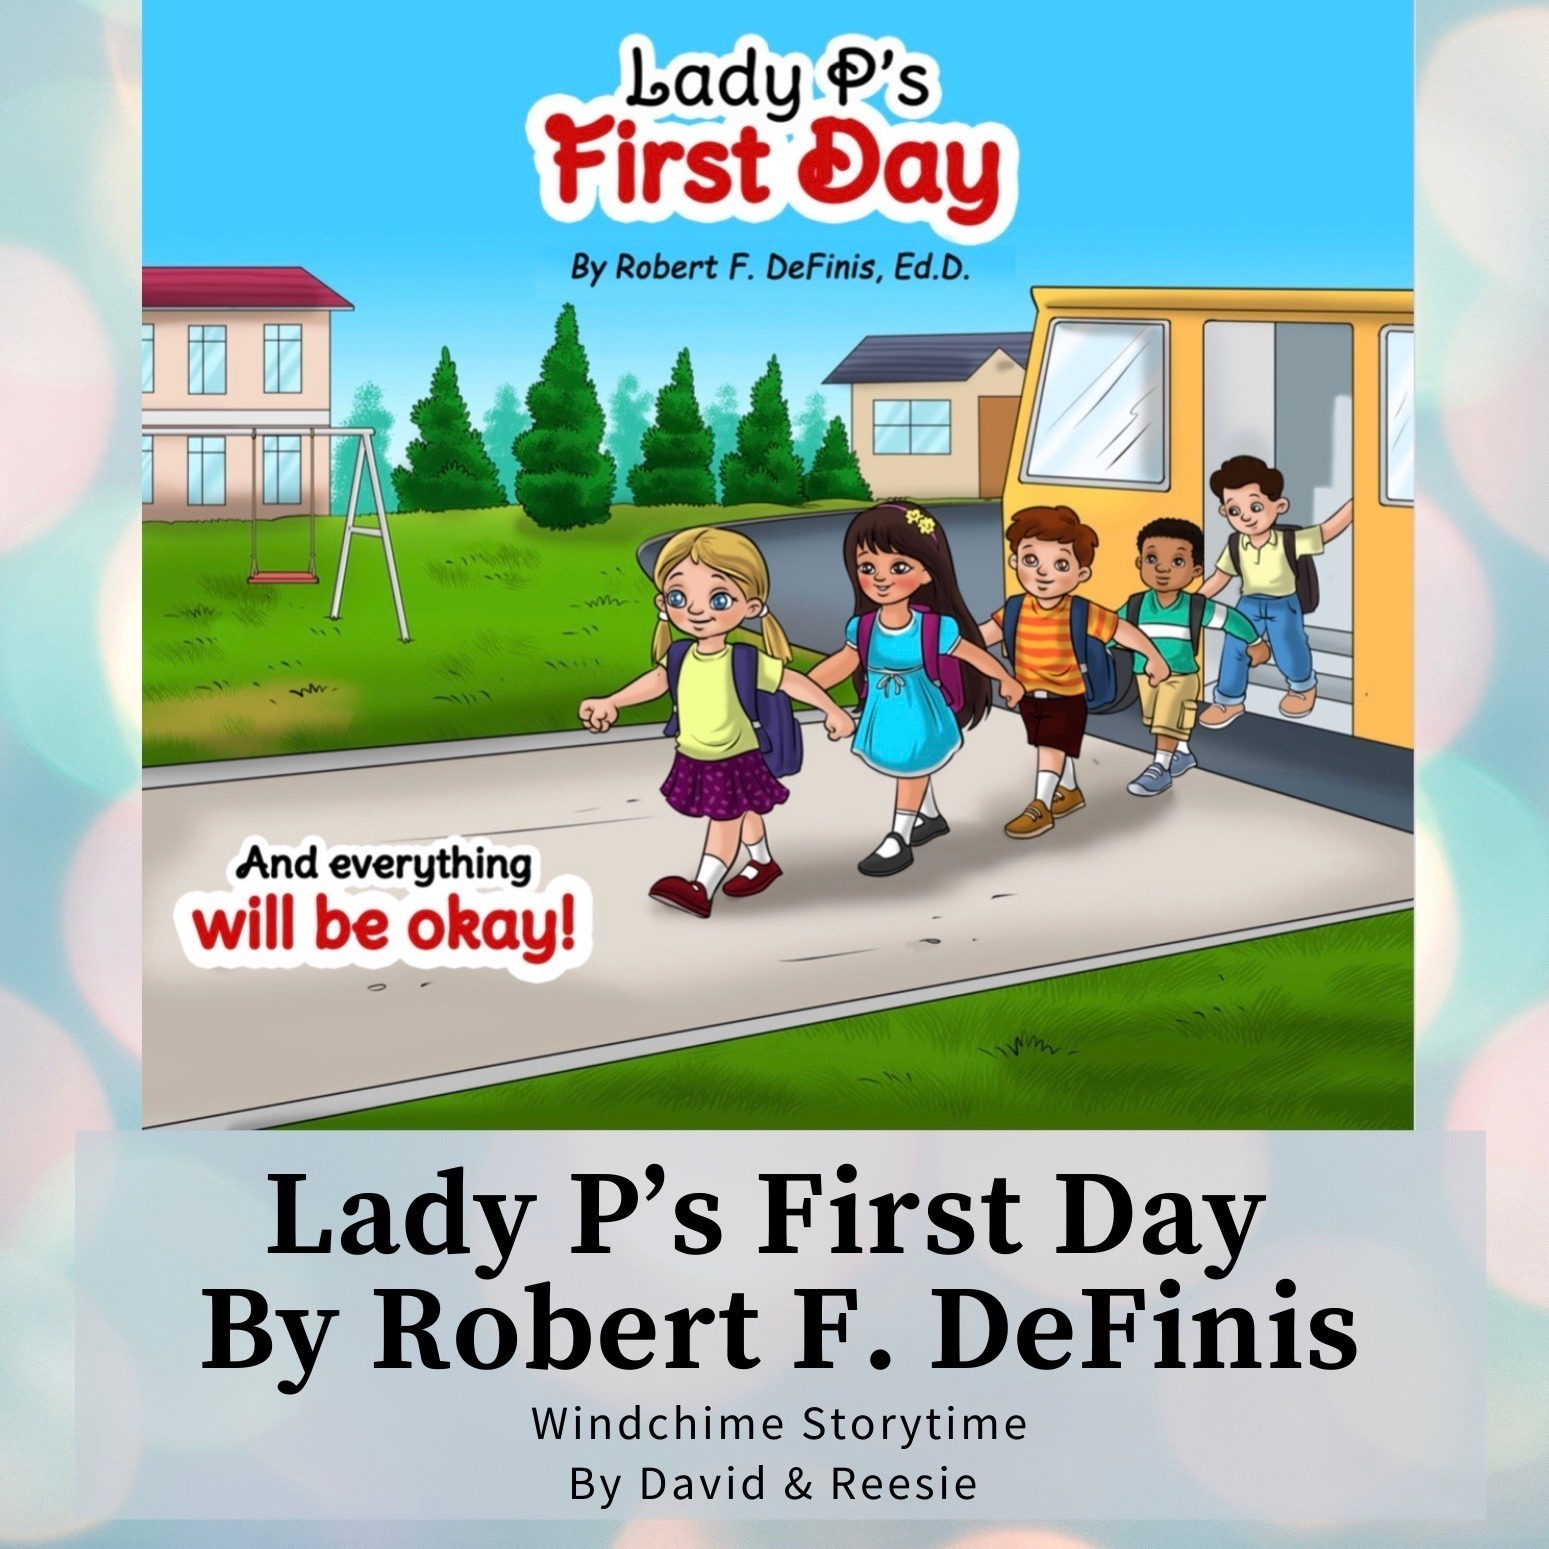 6- Lady P’s First Day by Robert F DeFinis